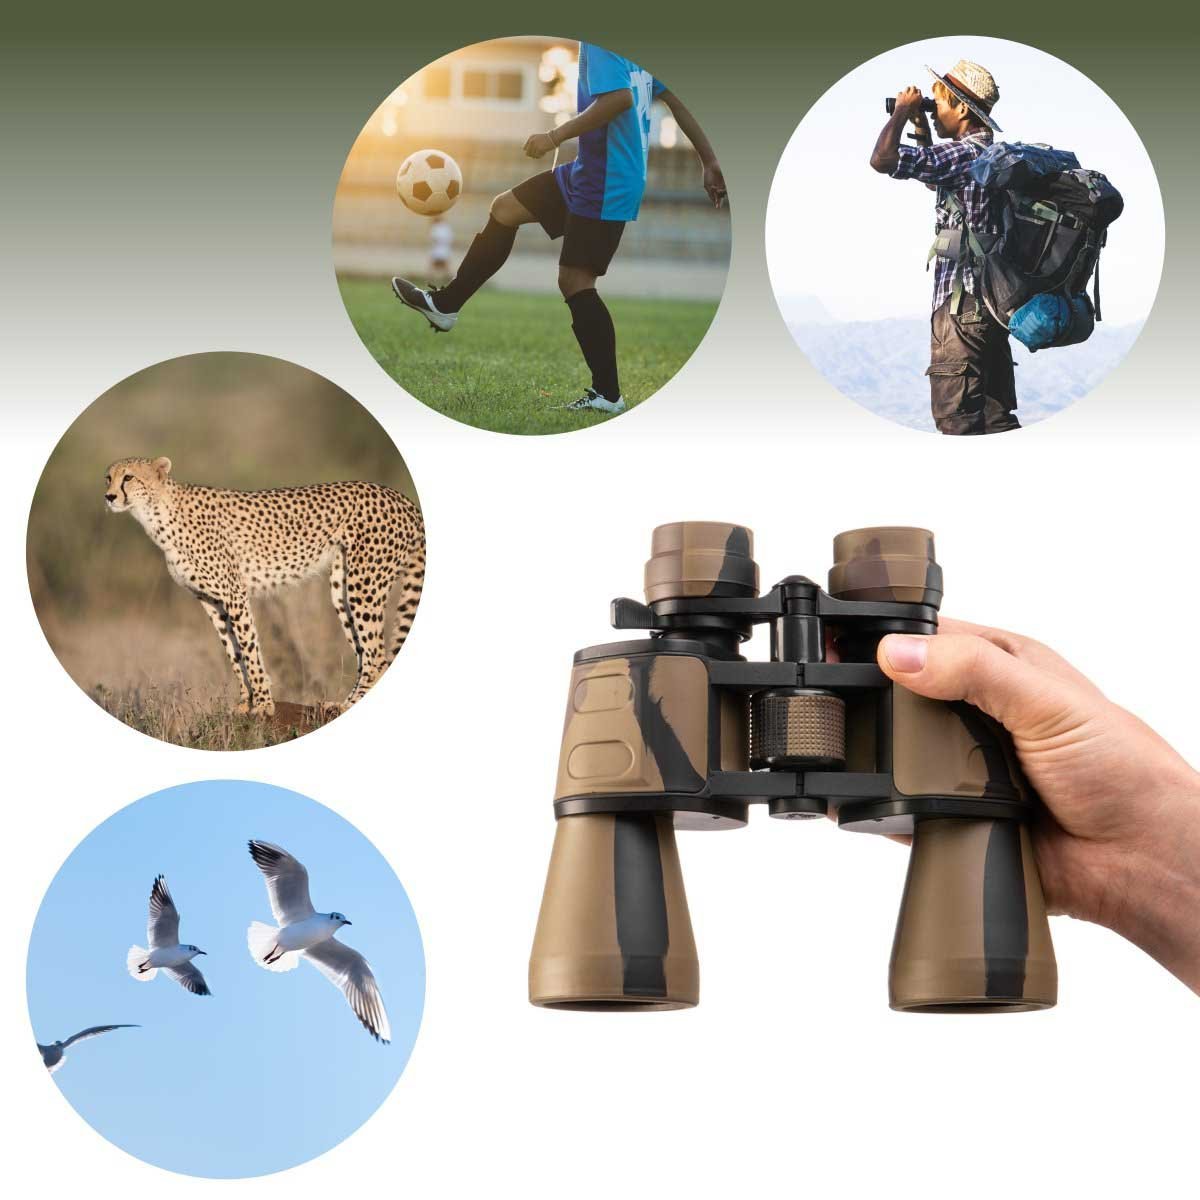 8-24x50 Hunter's Binocular with Travel Case could be used to explore the distant world around you